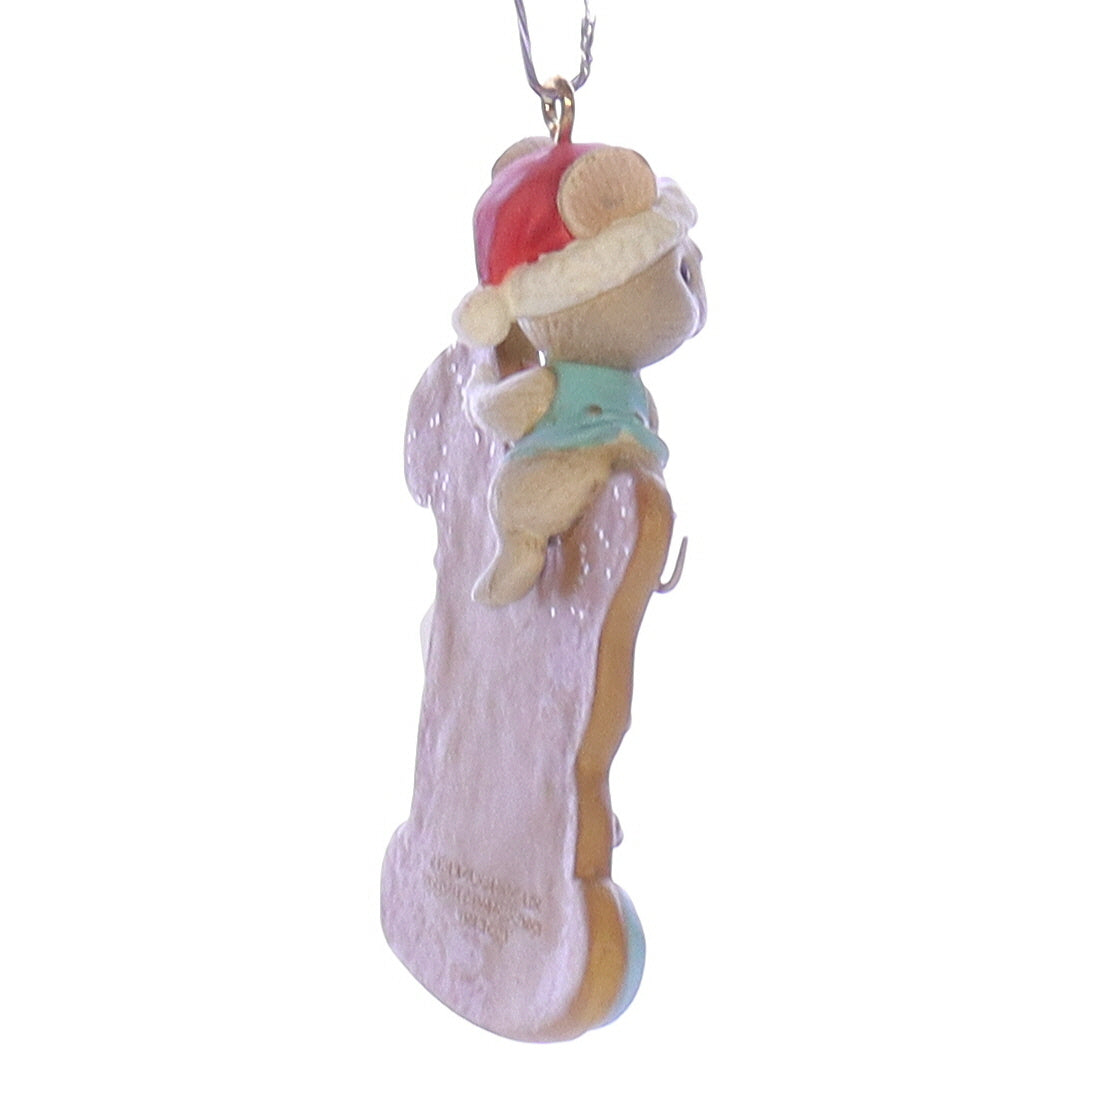 Enesco_Treasury_of_Christmas_Ornaments_8315814_Gingerbread_Greetings_Mouse_Ornament_1992 Back Right View